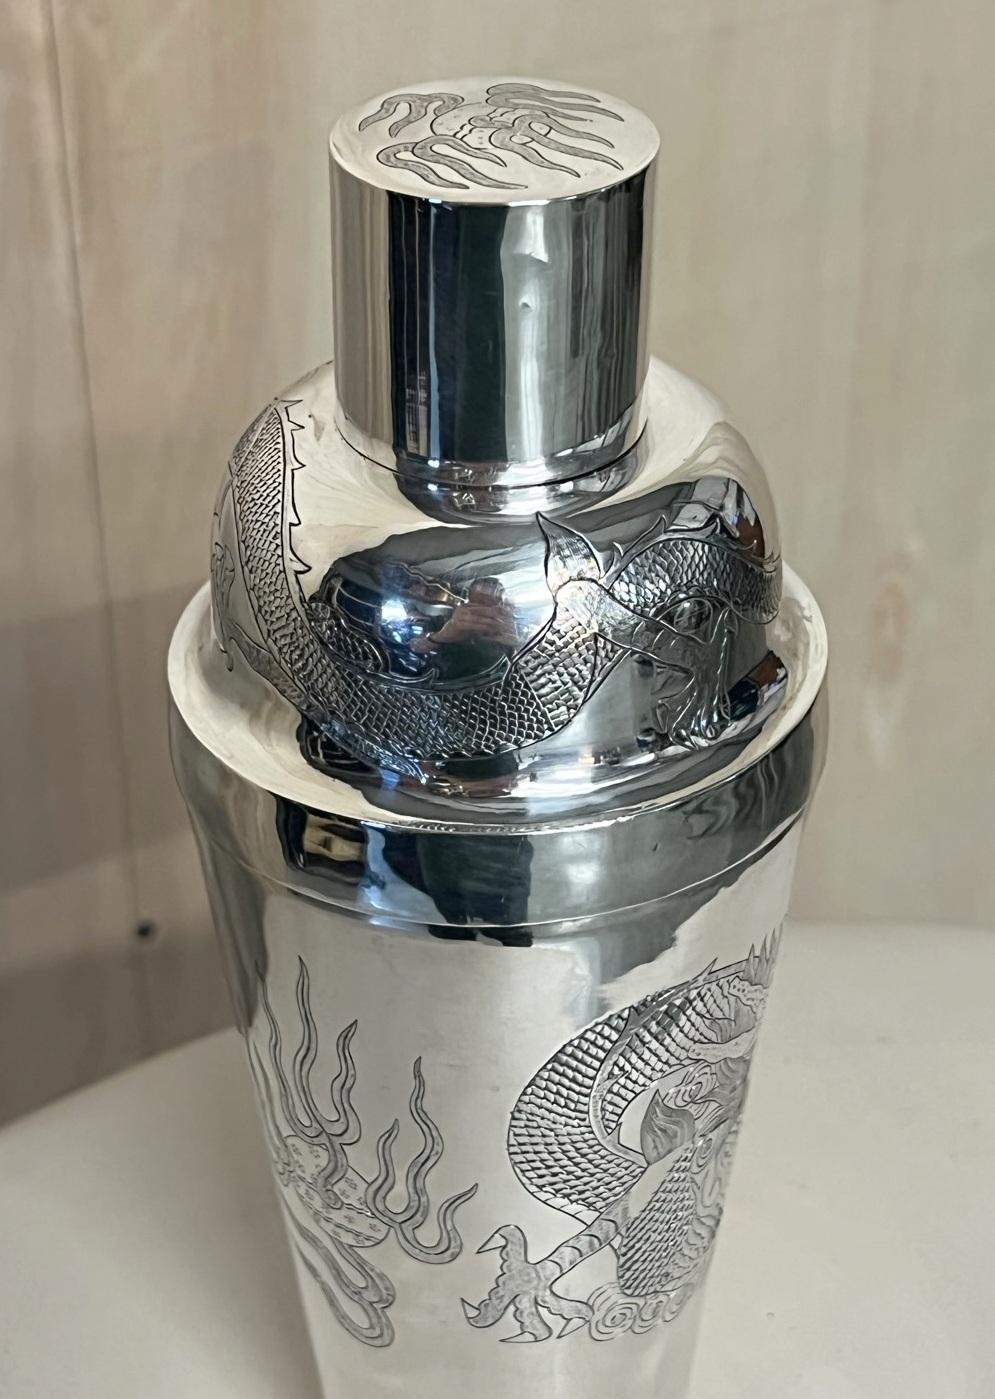 Royal House Antiques

Royal House Antiques is delighted to offer for sale this stunning, circa 1900 Chinese Export Dragon cocktail shaker

A good looking and well made piece, these were made for the export market in the 1900's and stopped production